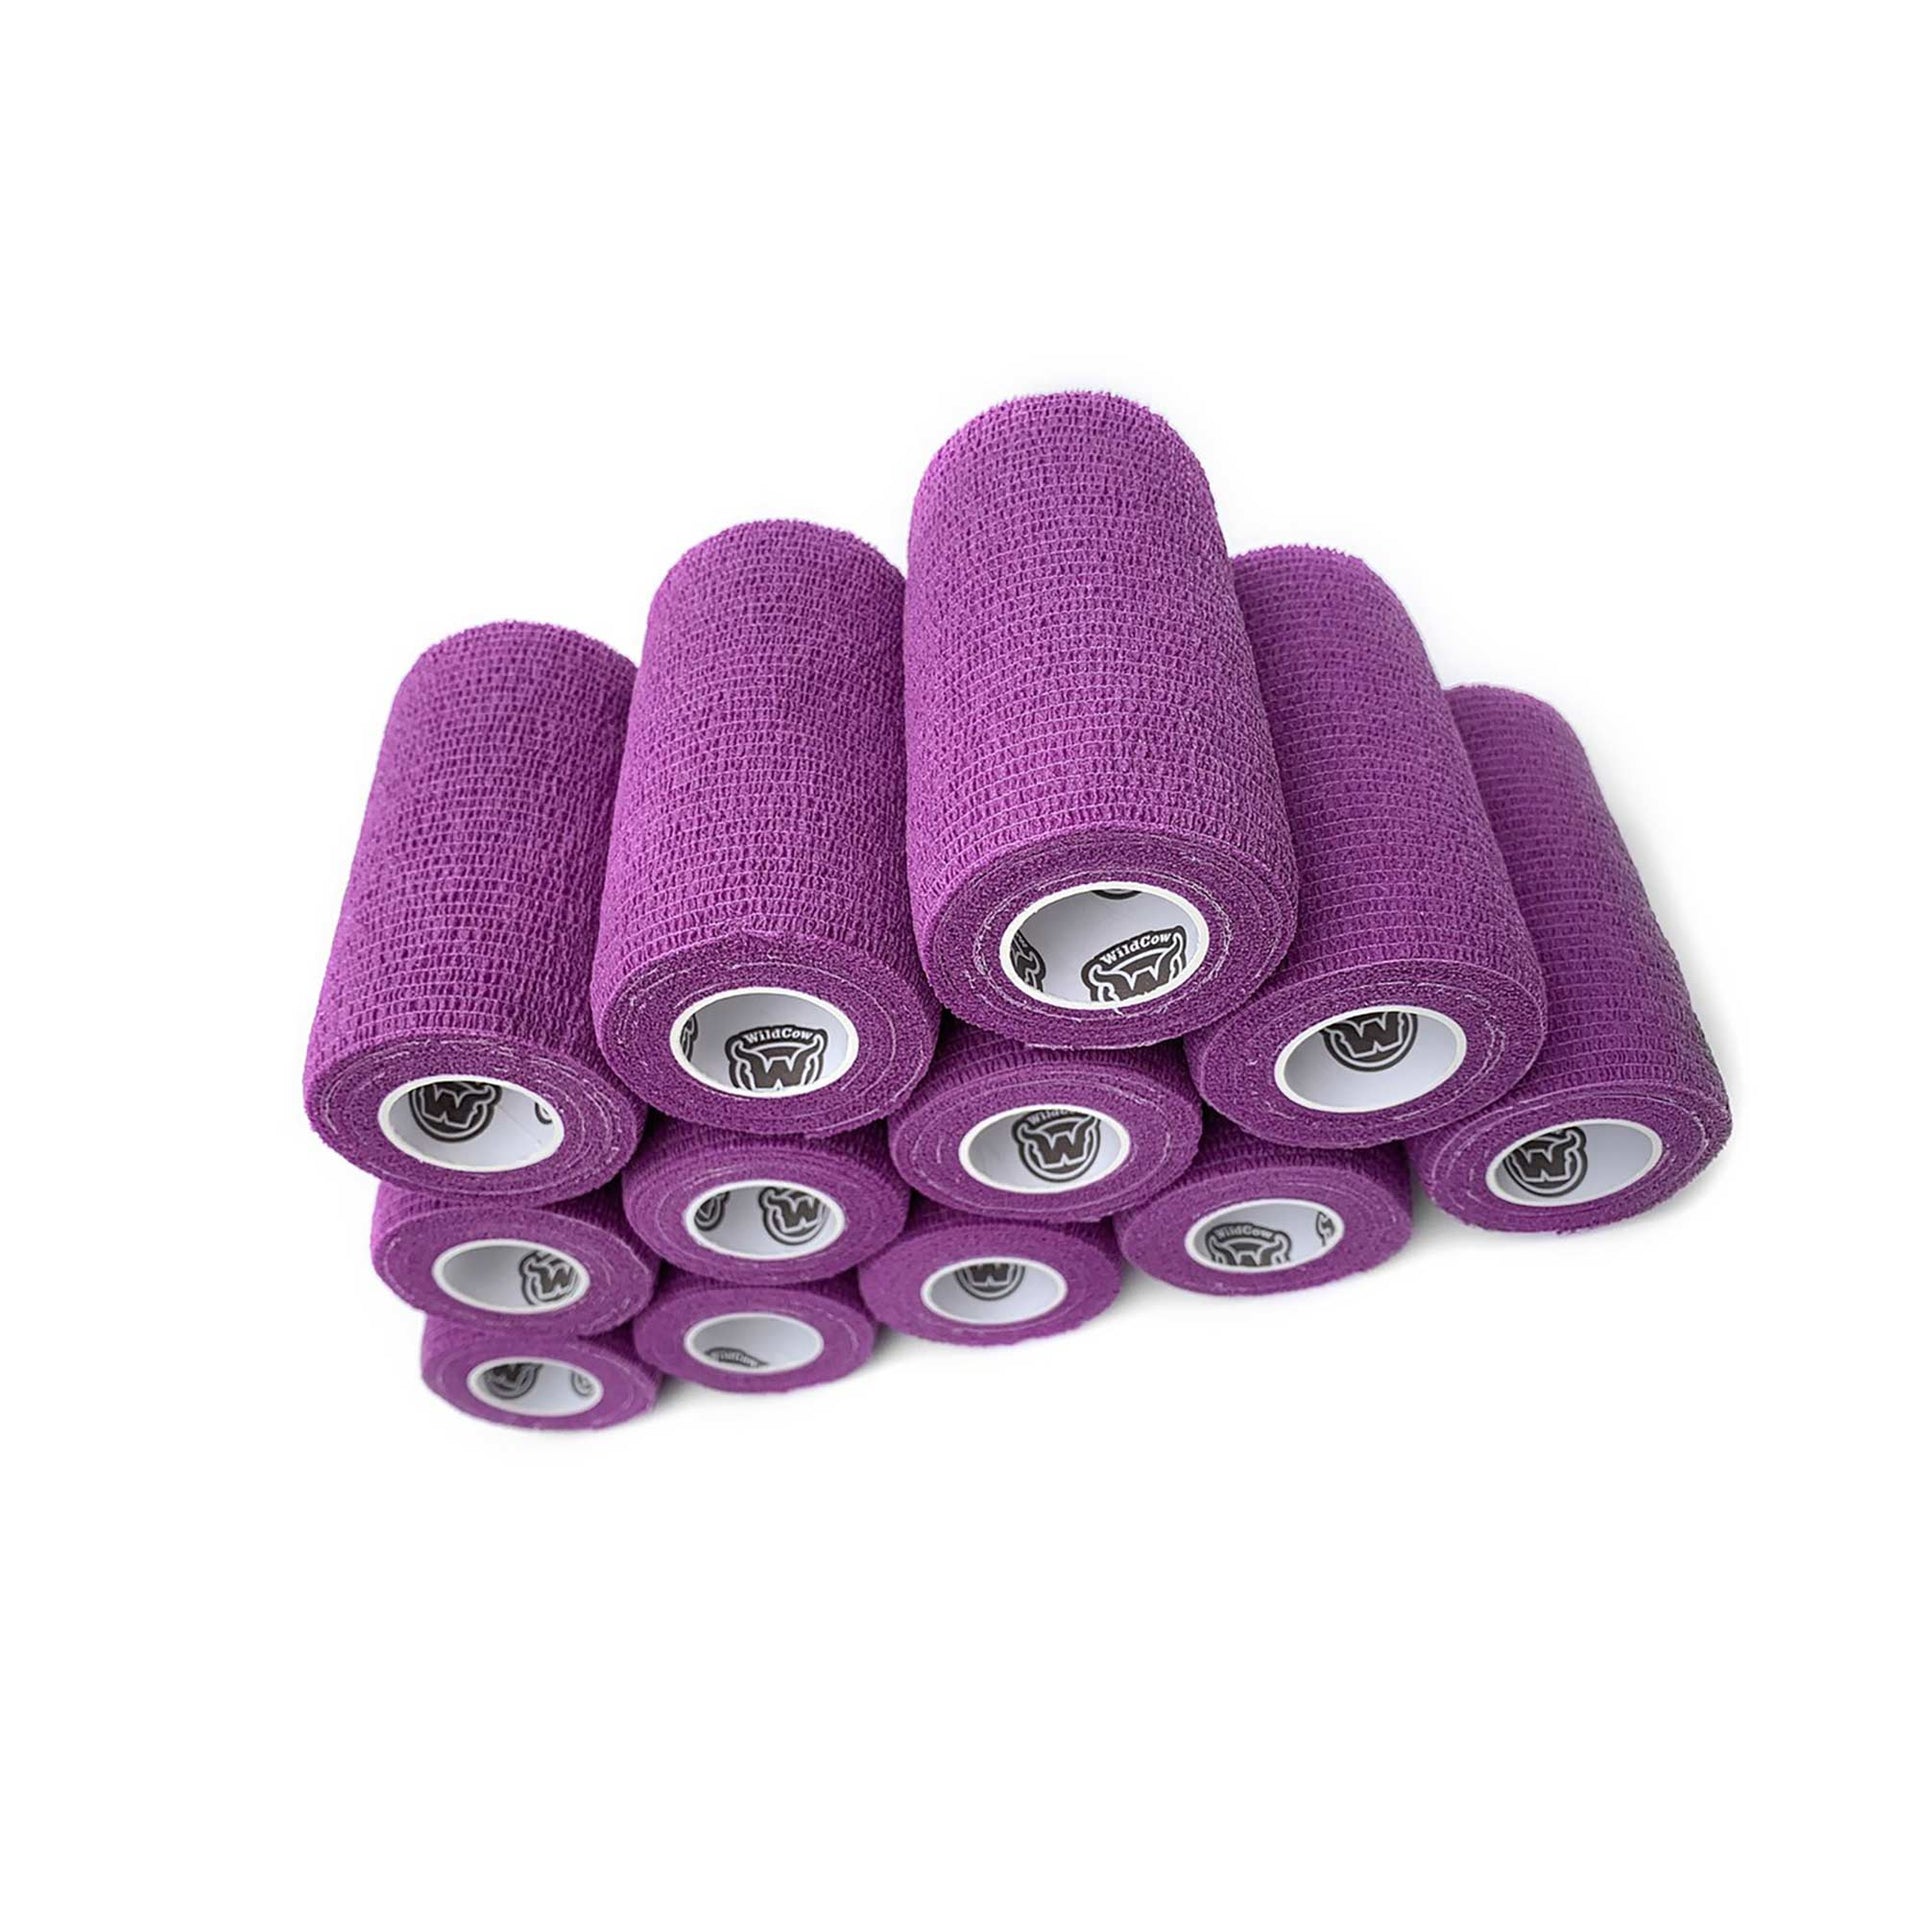 Purple 4 inch vet wrap 12 pack from WildCow